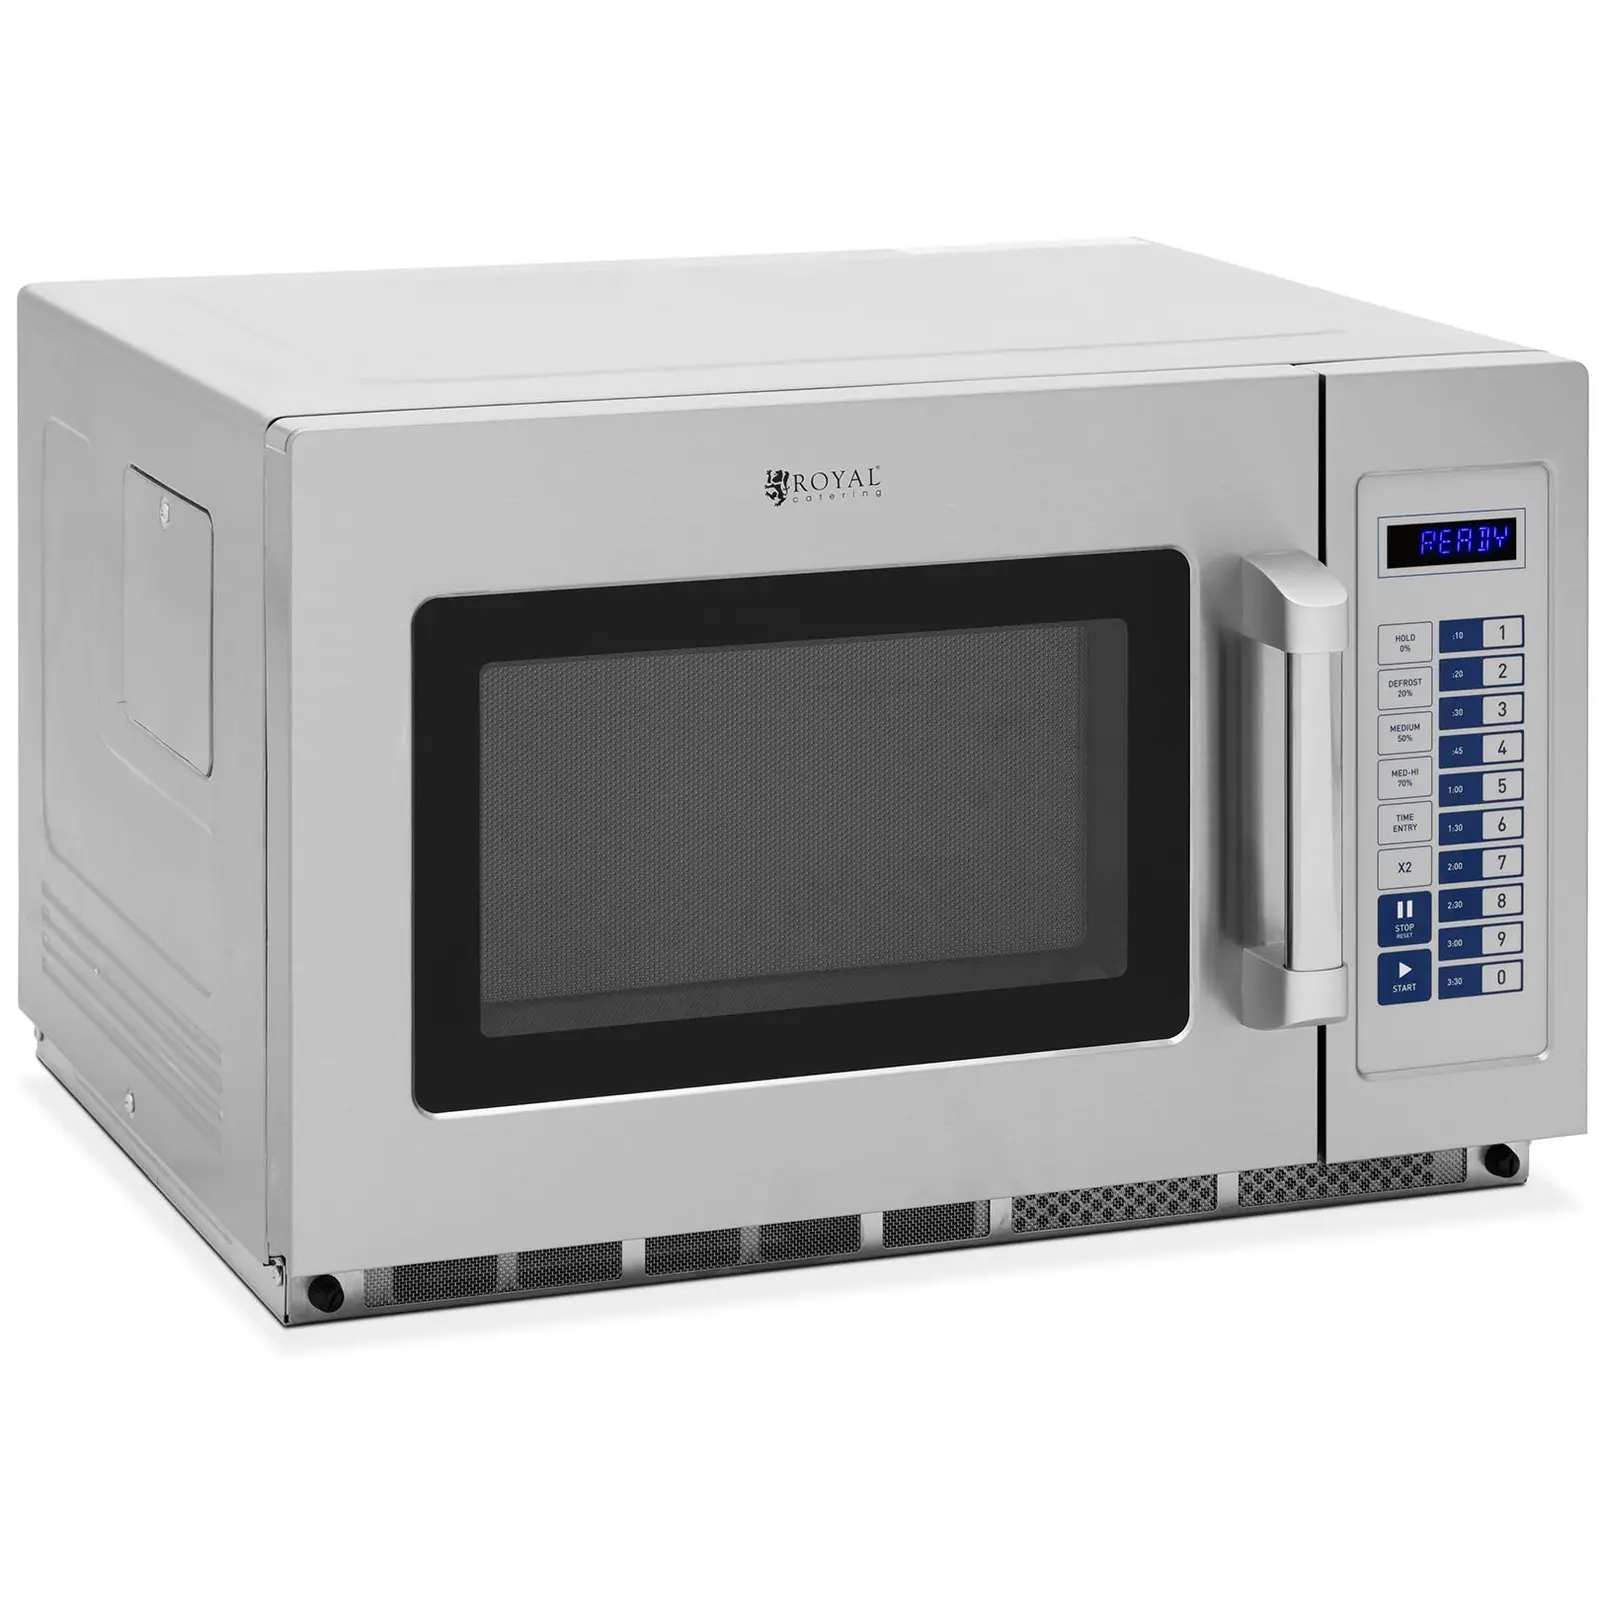 Forno microondas - catering - 3200 W - 34 l - Royal Catering